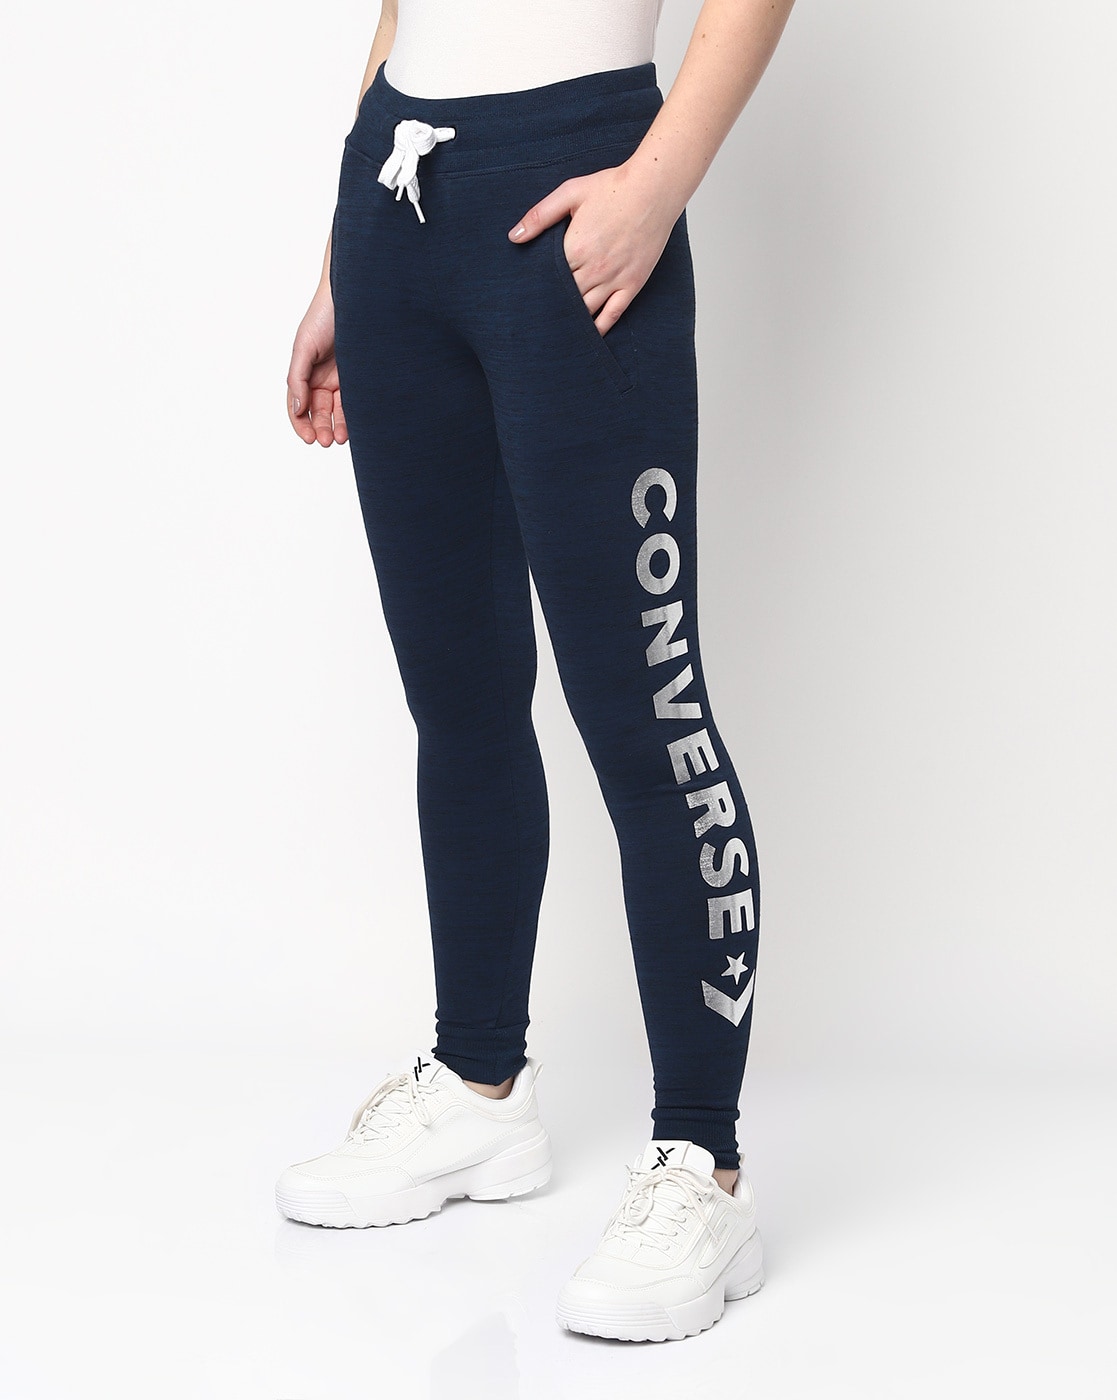 CONVERSE TRACK PANTS, Men's Fashion, Activewear on Carousell